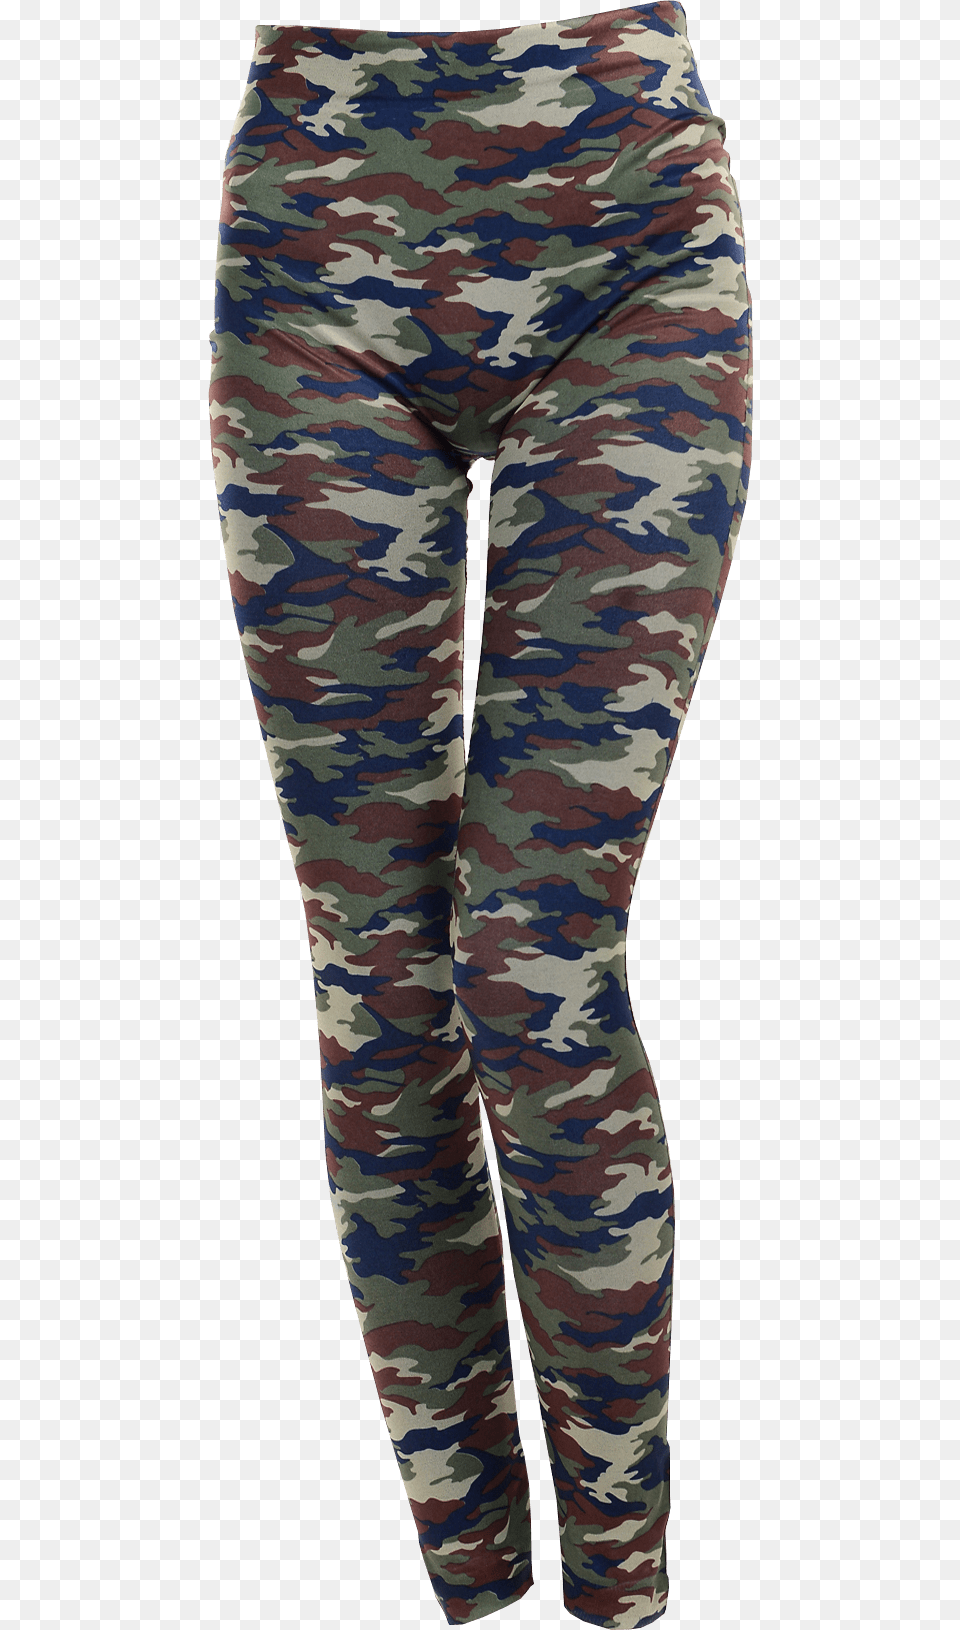 Camouflage Leggings Background Clothing Leggings, Pants, Military, Military Uniform Free Transparent Png